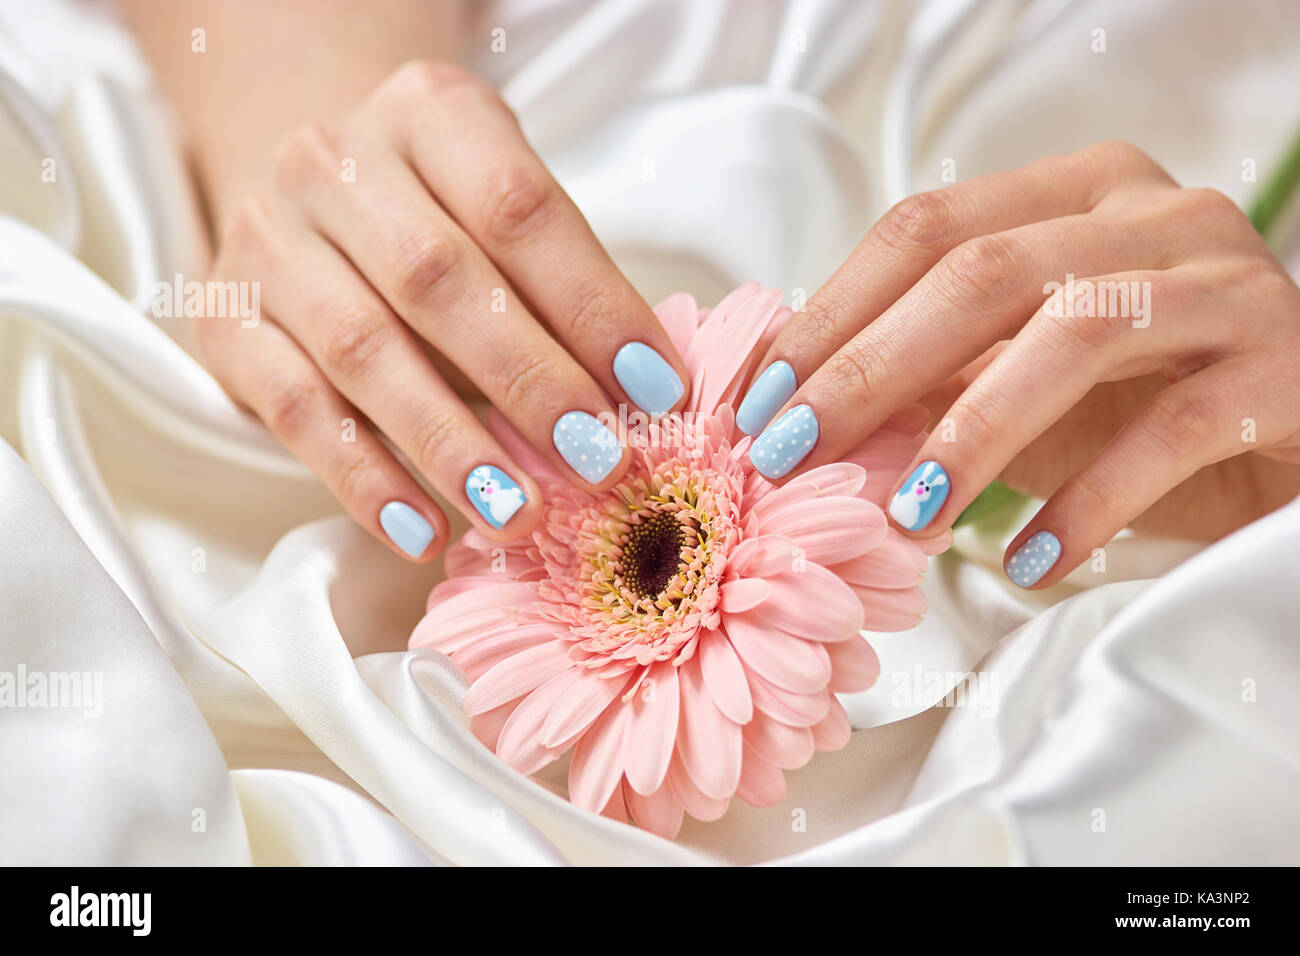 Female Manicured Hands Holding Gerbera Beautiful Woman Hands With Winter Design Manicure